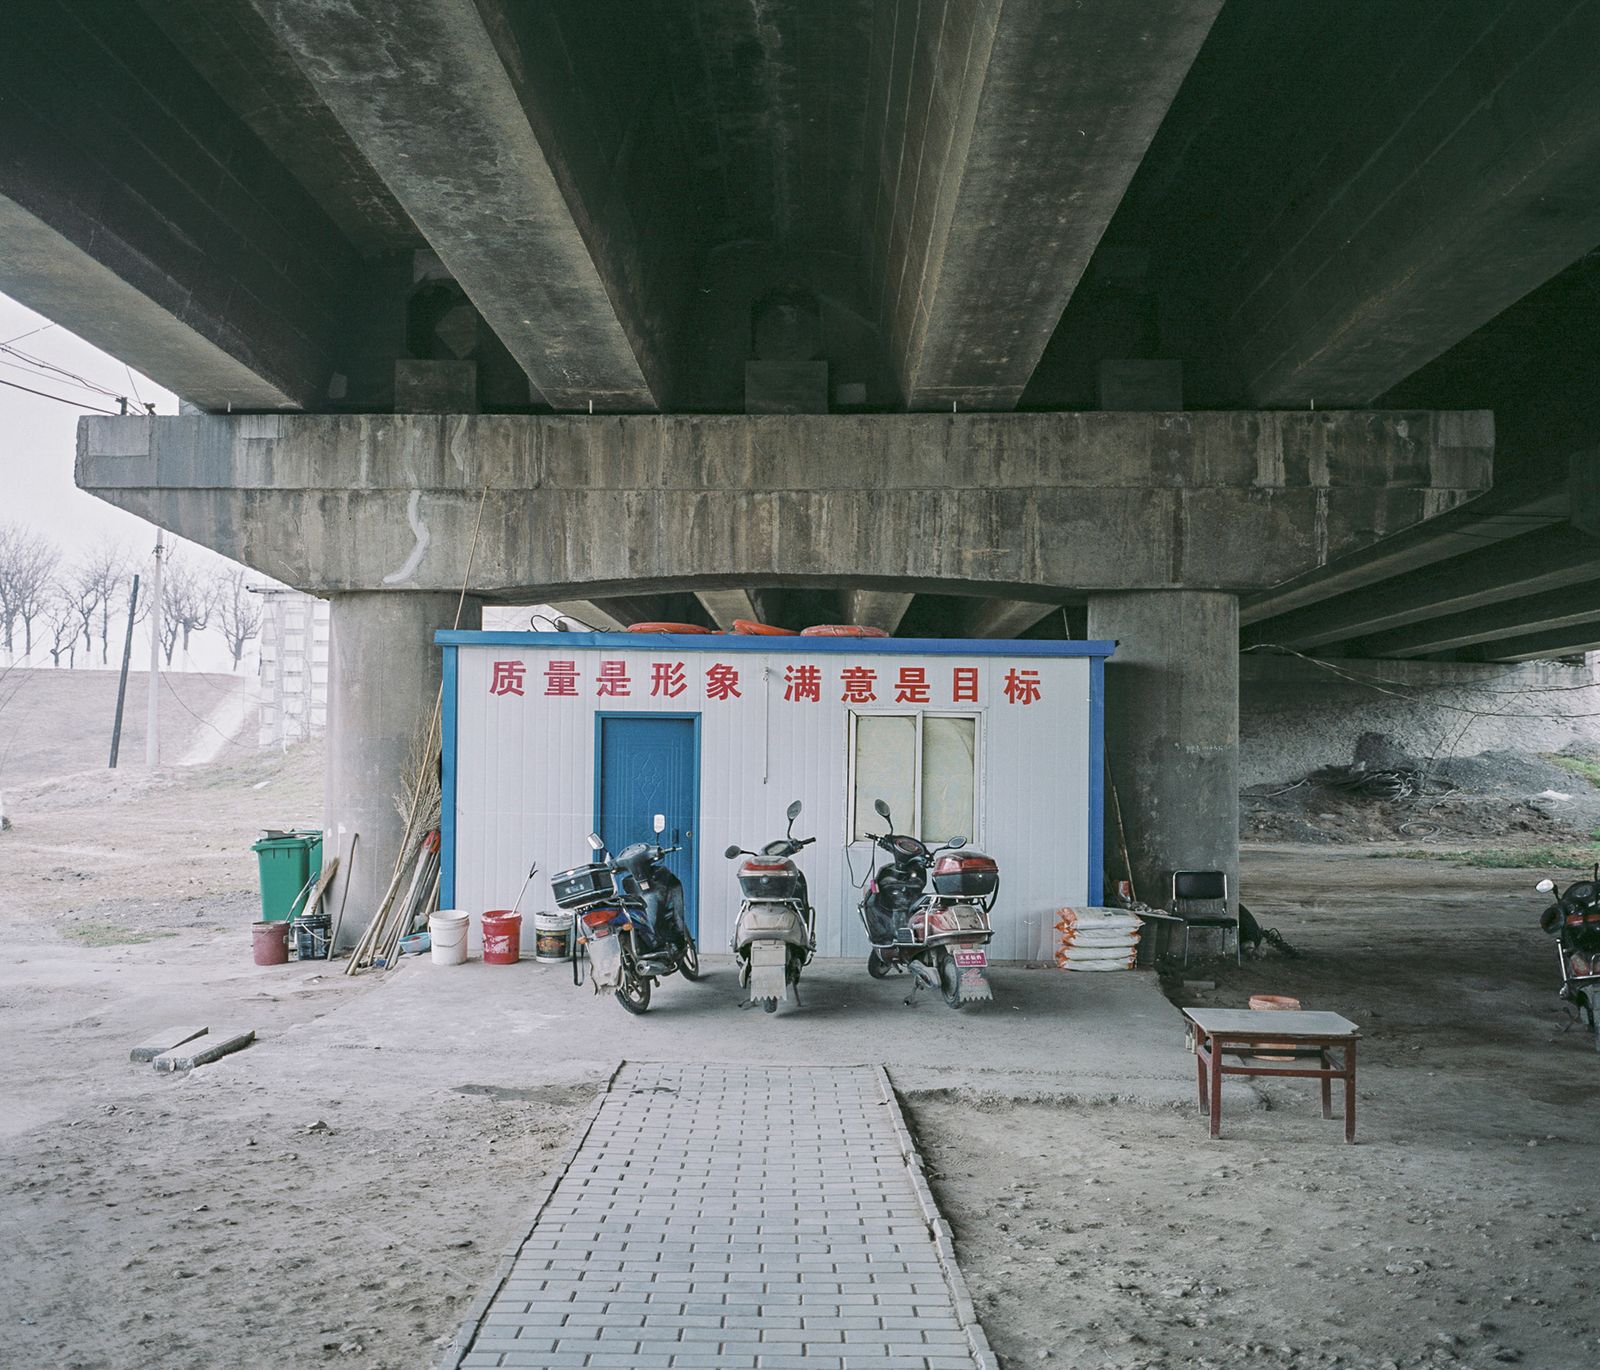 © Pan Wang - Image from the The Wei River is vast photography project